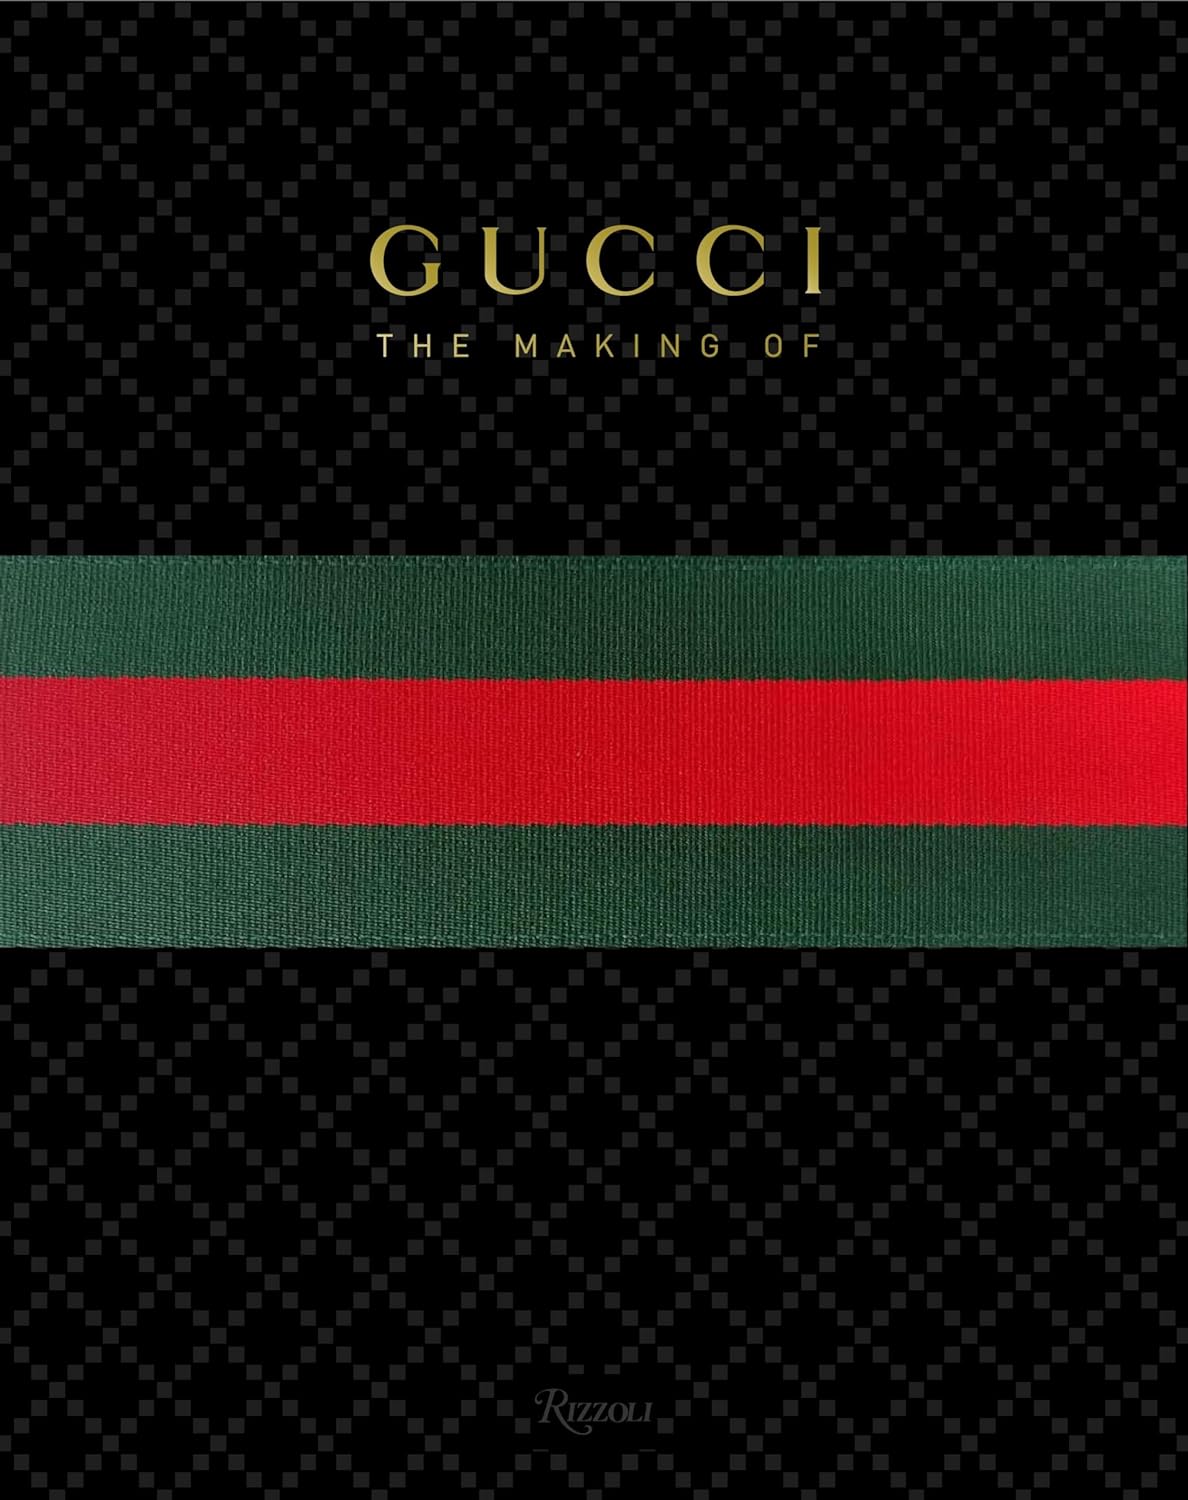 GUCCI: The Making Of (Hardcover)